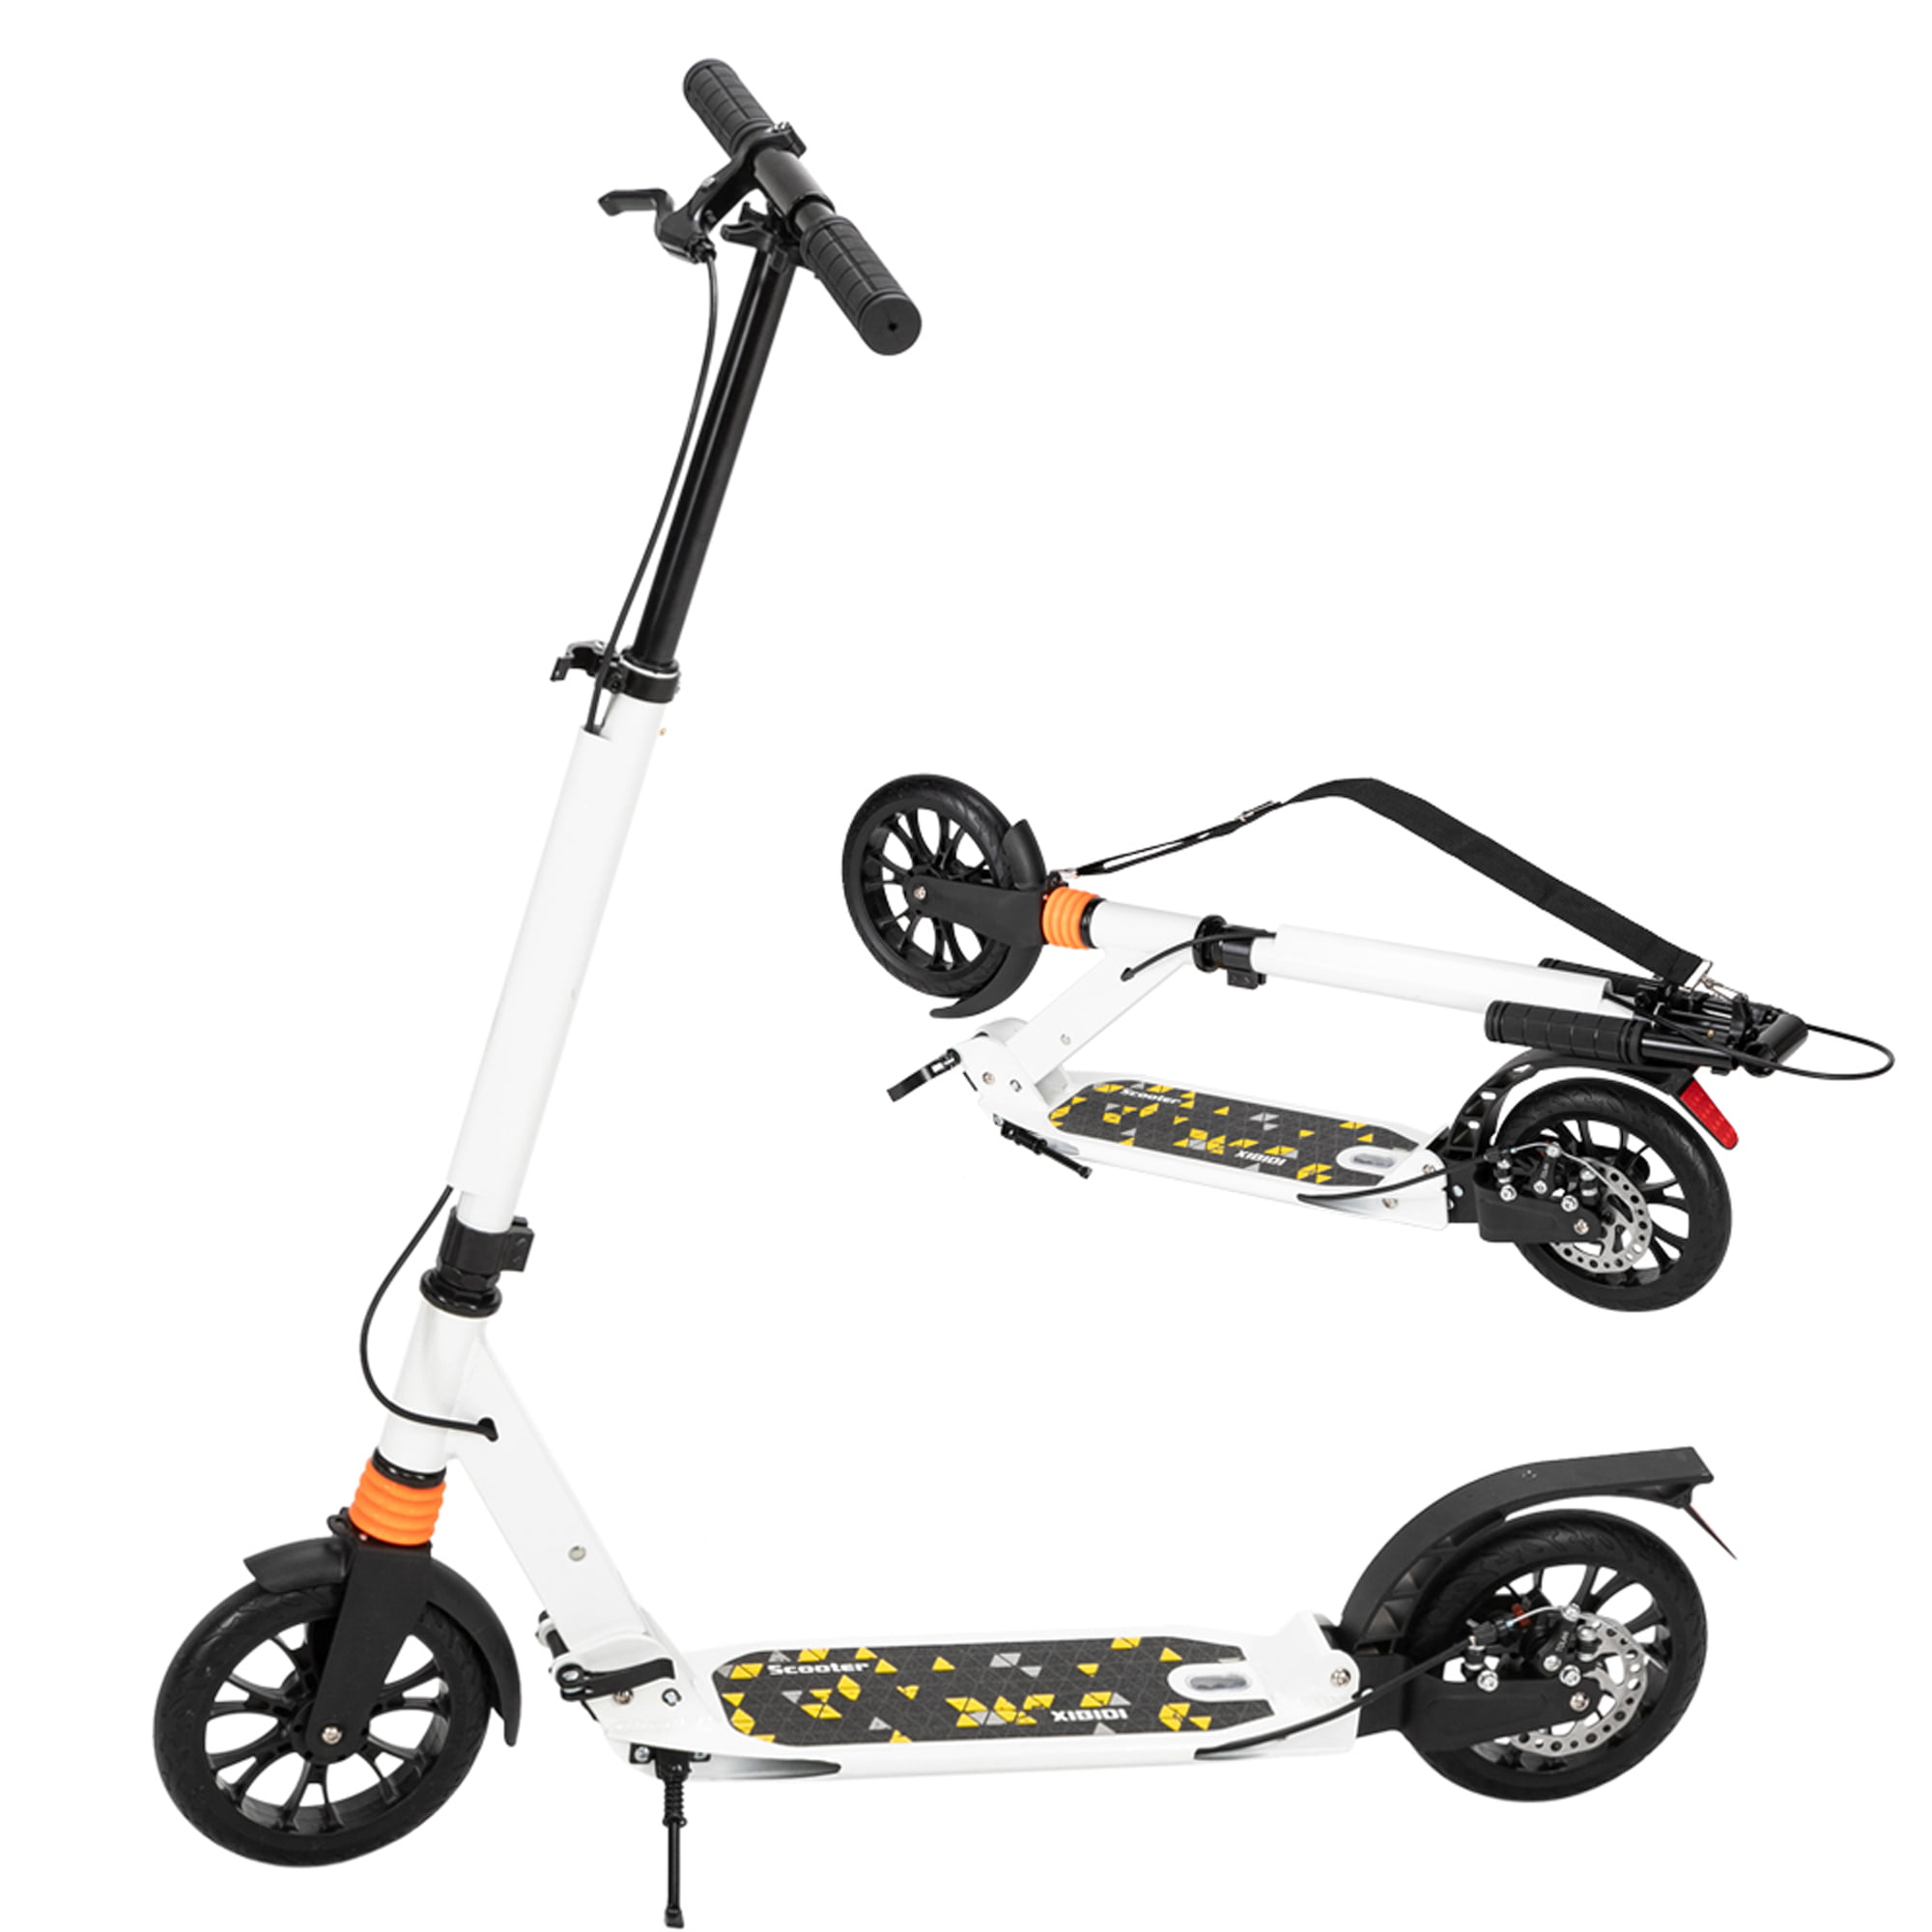 WIN.MAX Kick Scooter for Adults and Teens,Disc Brake for More Safe，with 200mm LED Wheels,Foldable Handle with 4 Adjustment Levels,220 Lbs Weight Capacity，Scooters for Kids 12 Years and up